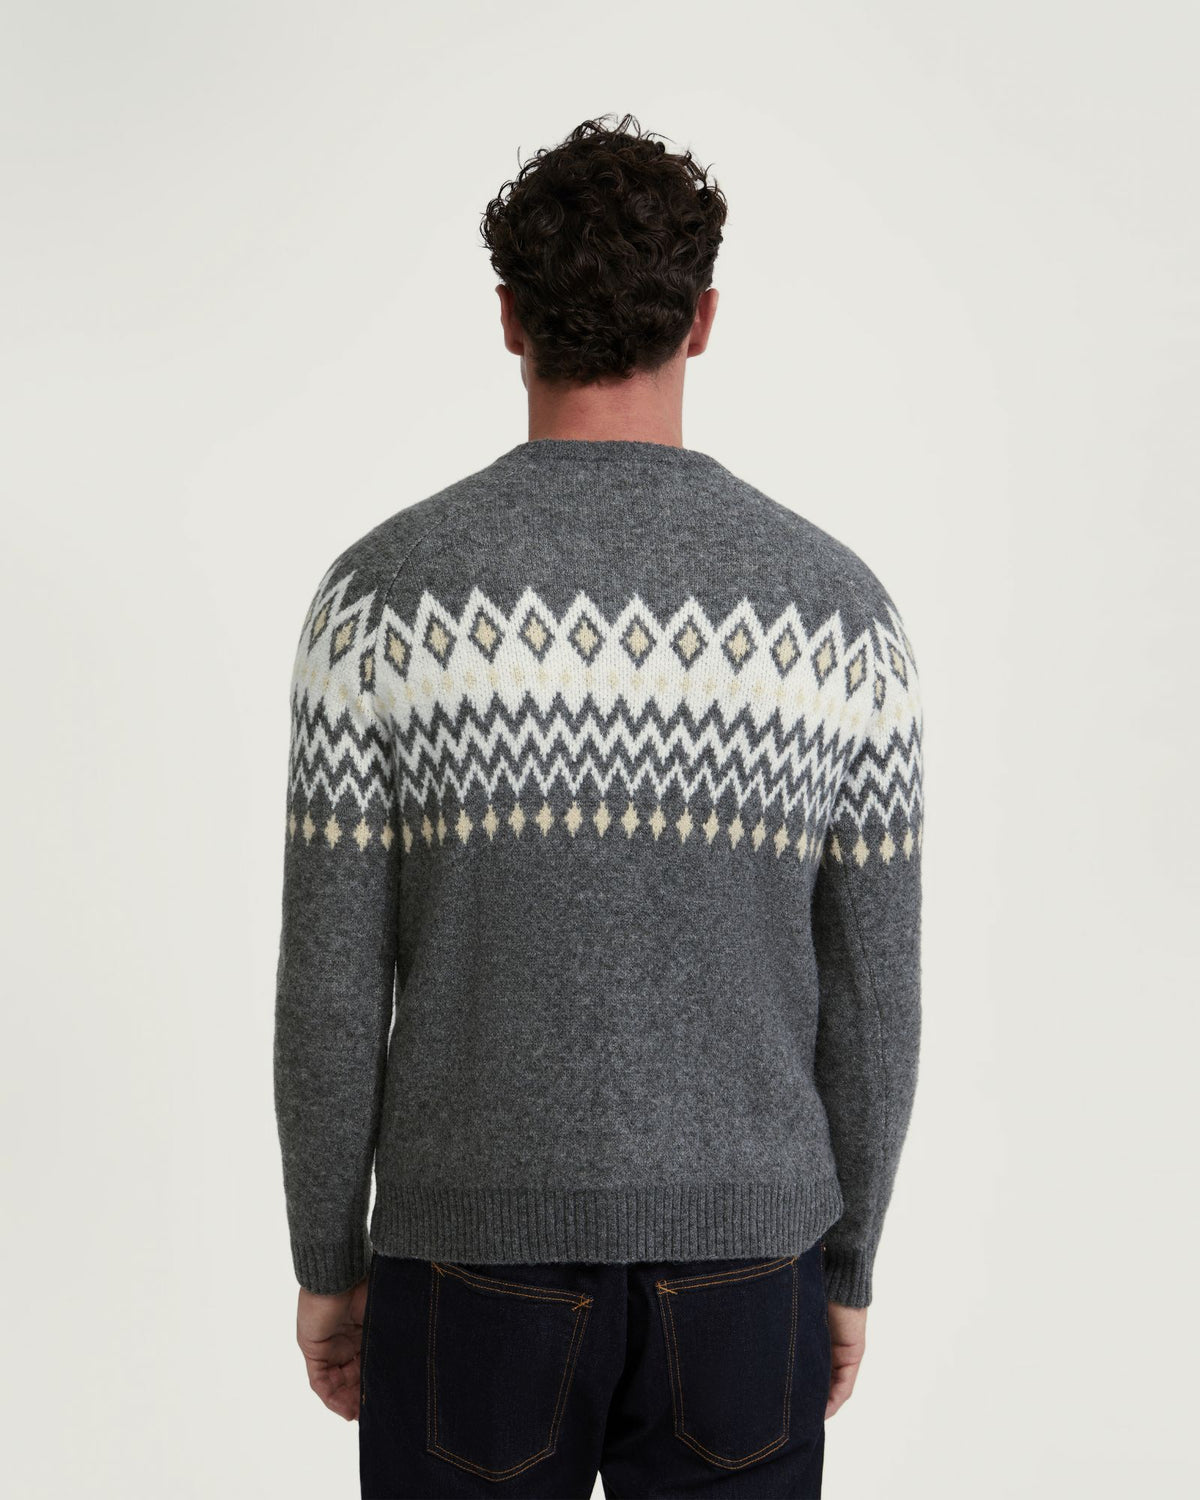 ASHTON PATTERNED CREW NECK KNIT - AVAILABLE ~ 1-2 weeks MENS KNITWEAR